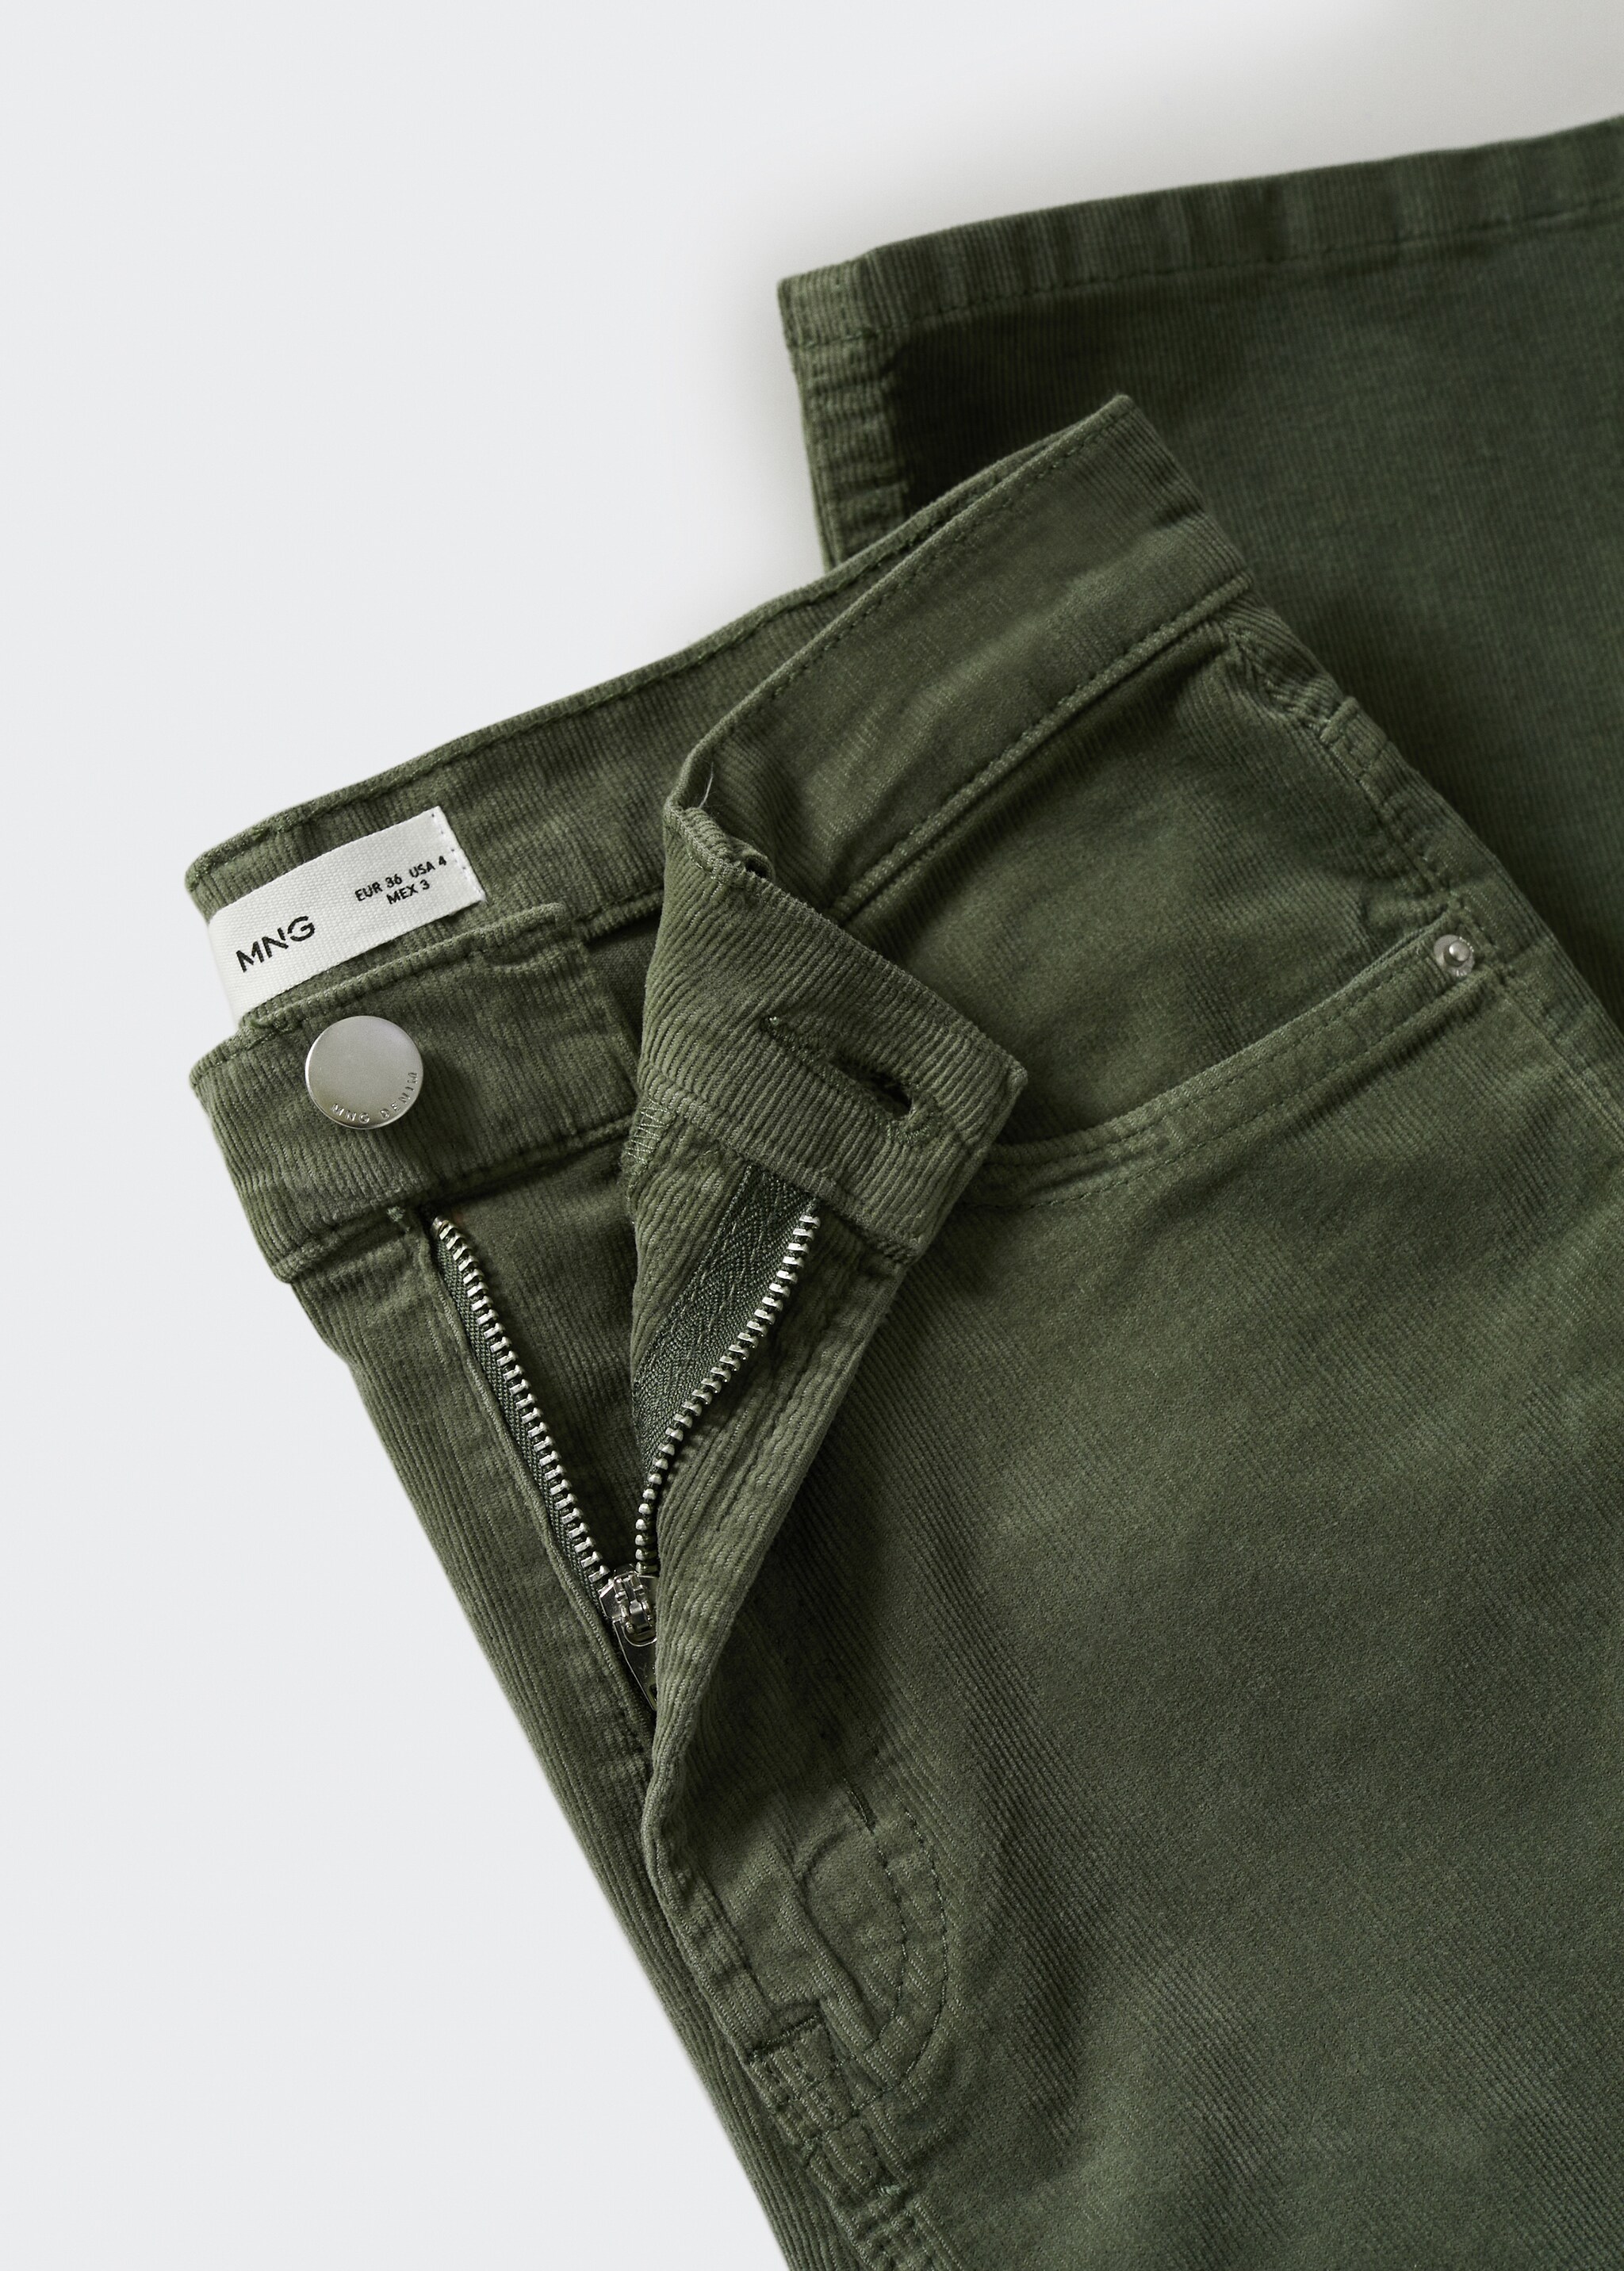 Corduroy bootcut jeans - Details of the article 8